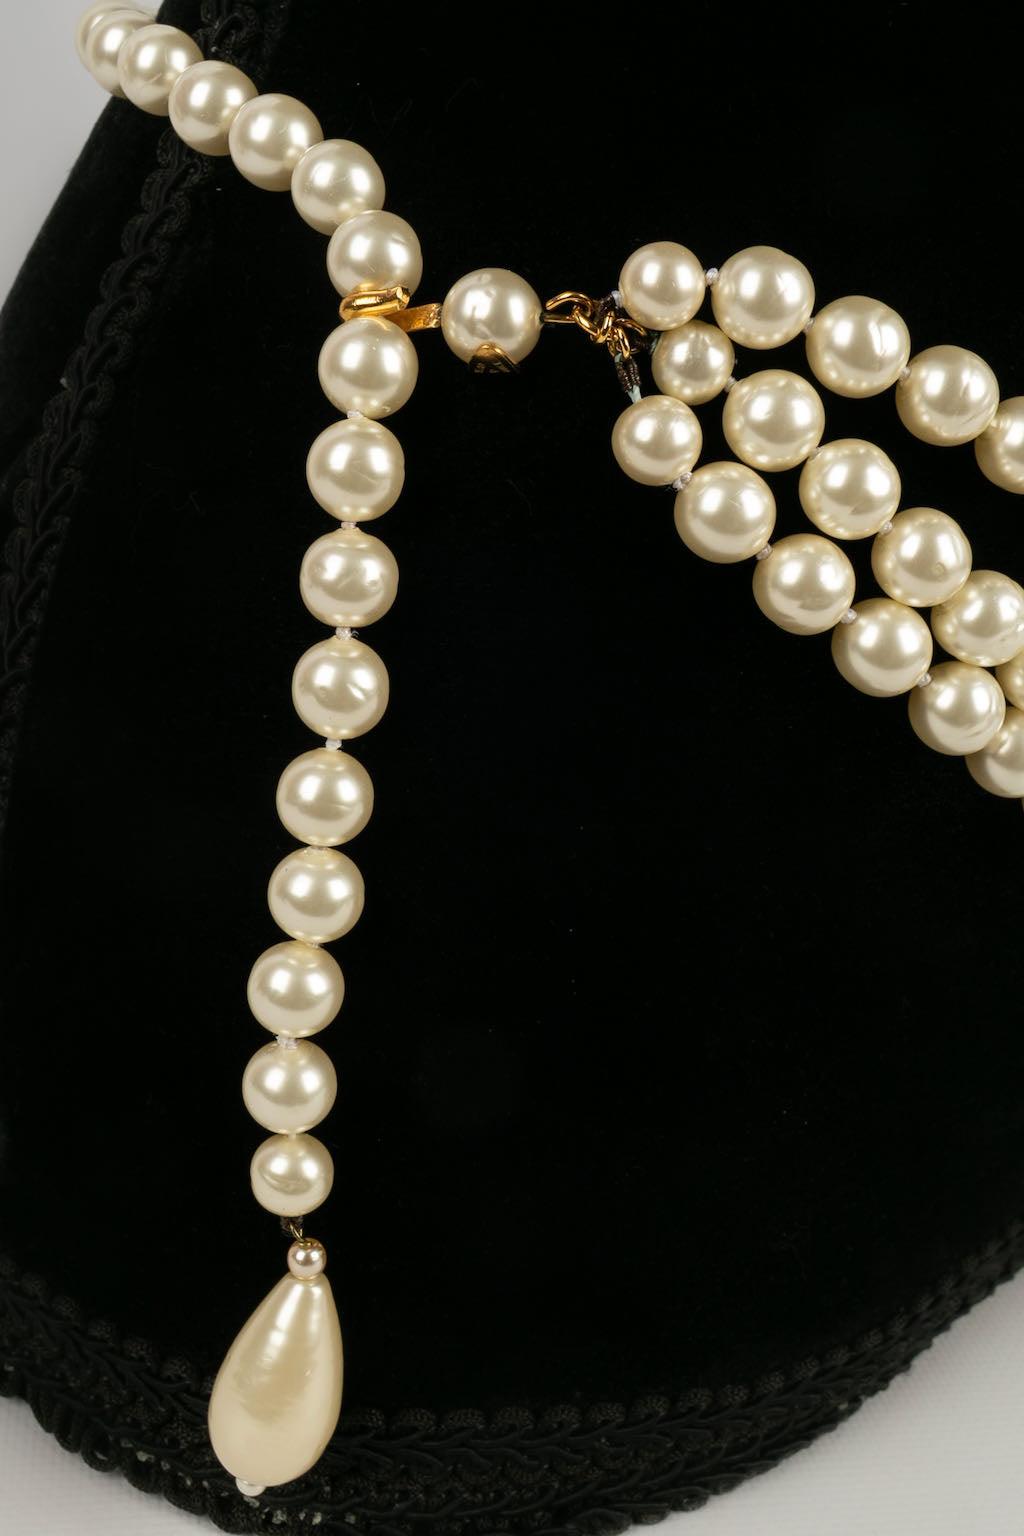 Chanel - (Made in France) Pearl belt, Spring-Summer 1993 collection. To note, the rings may have traces of oxidation.

Additional information:
Condition: Very good condition
Dimensions: Length : 94 cm
Period: 20th Century

Seller Reference: CCB29